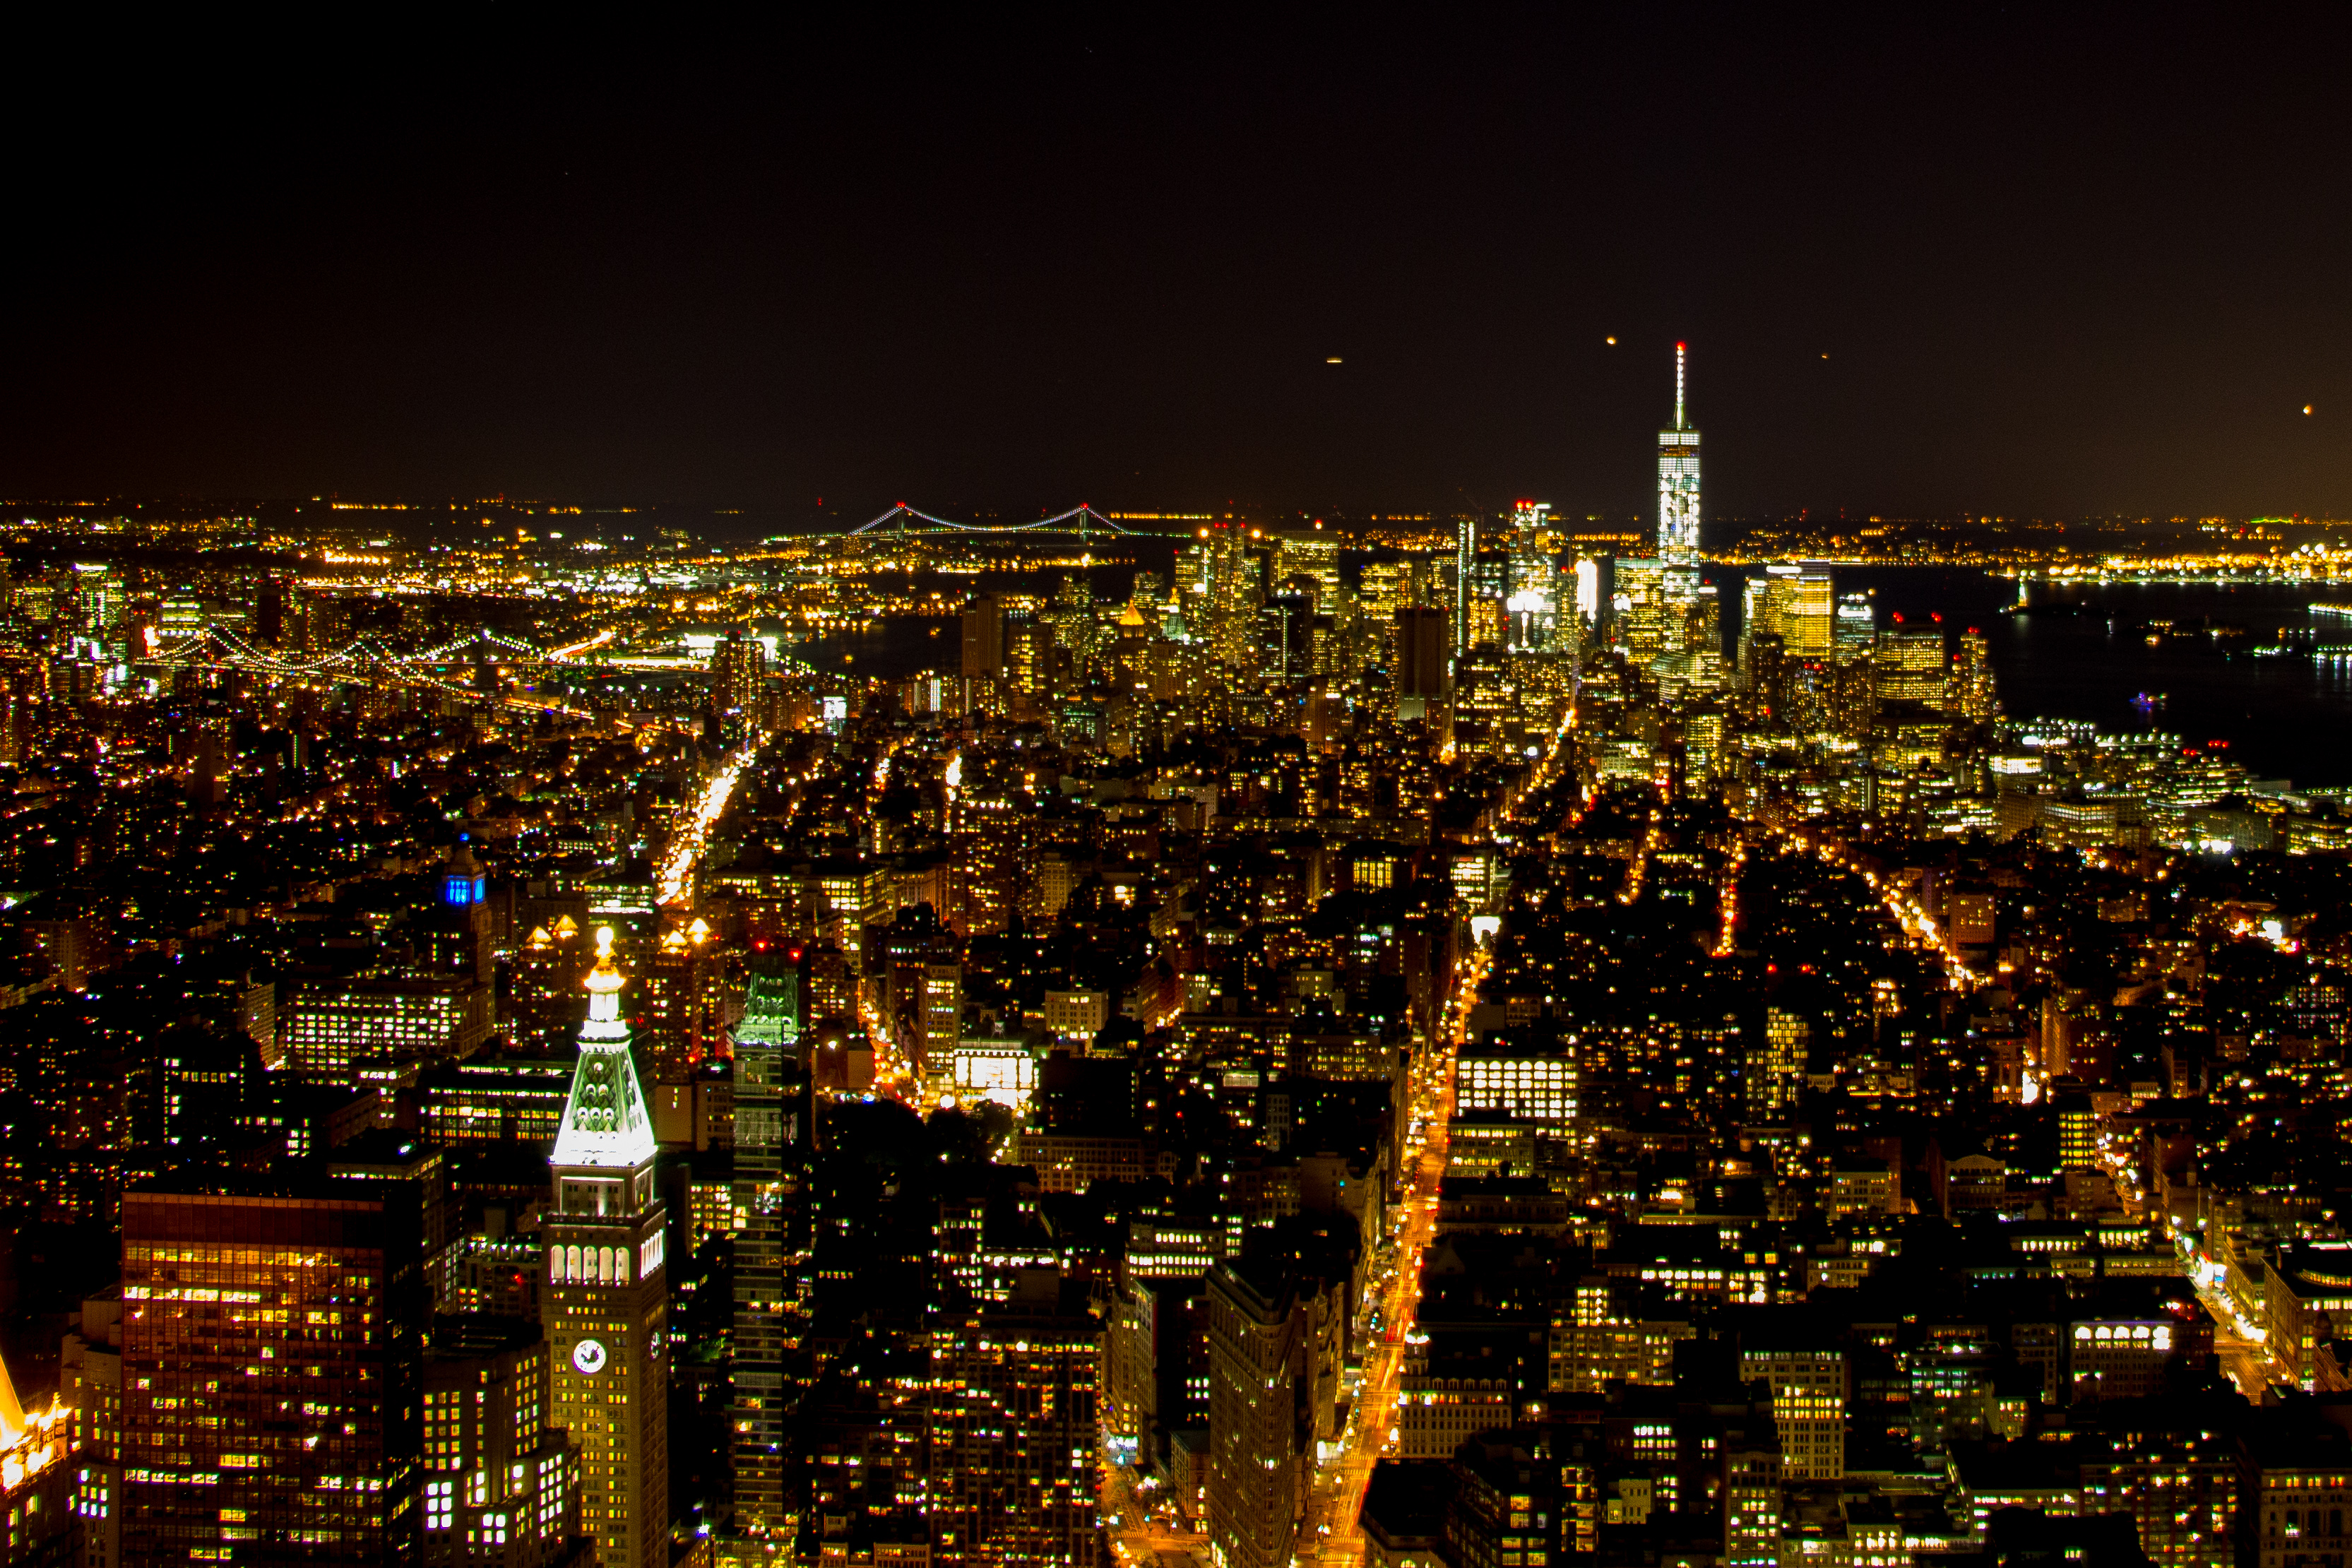 Top of the empire state at night photo